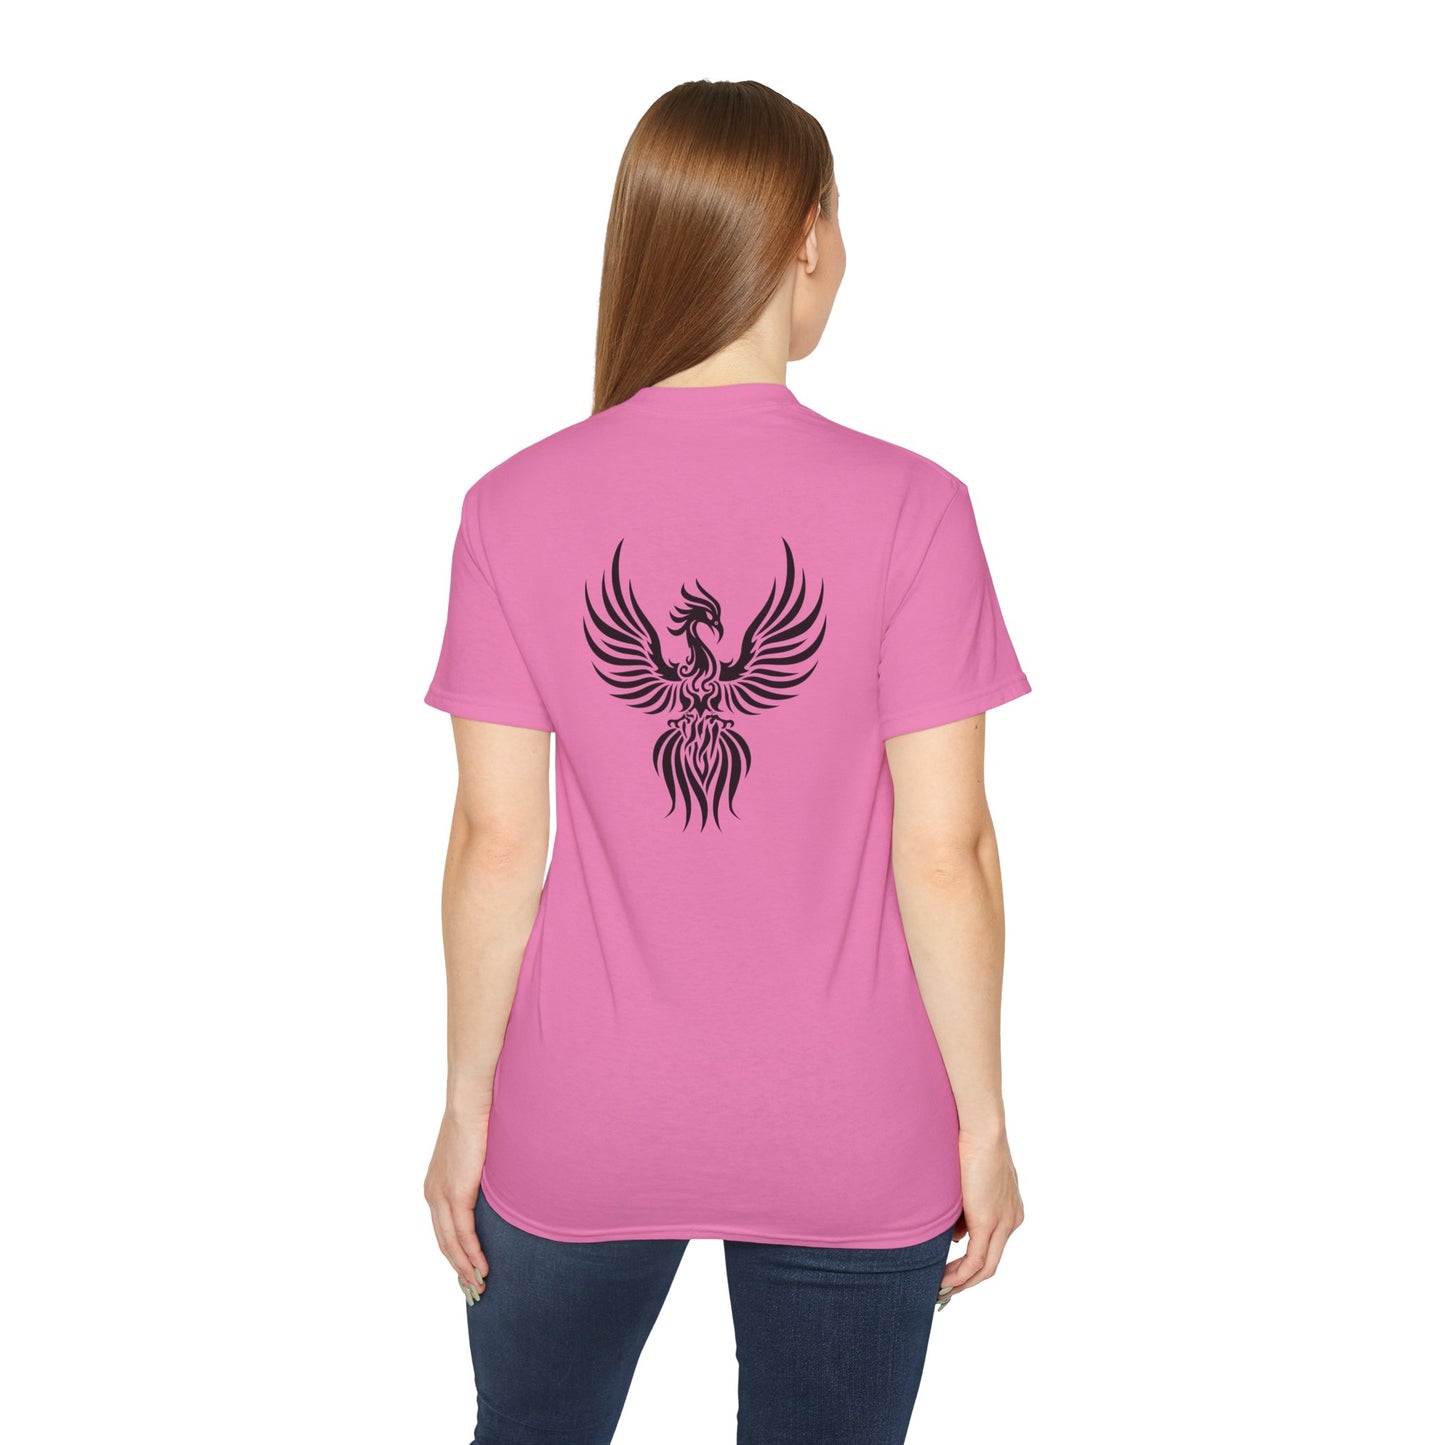 TESTED BY FIRE FAITH EMERGES STRONGER Unisex Christian Ultra Cotton Tee Printify